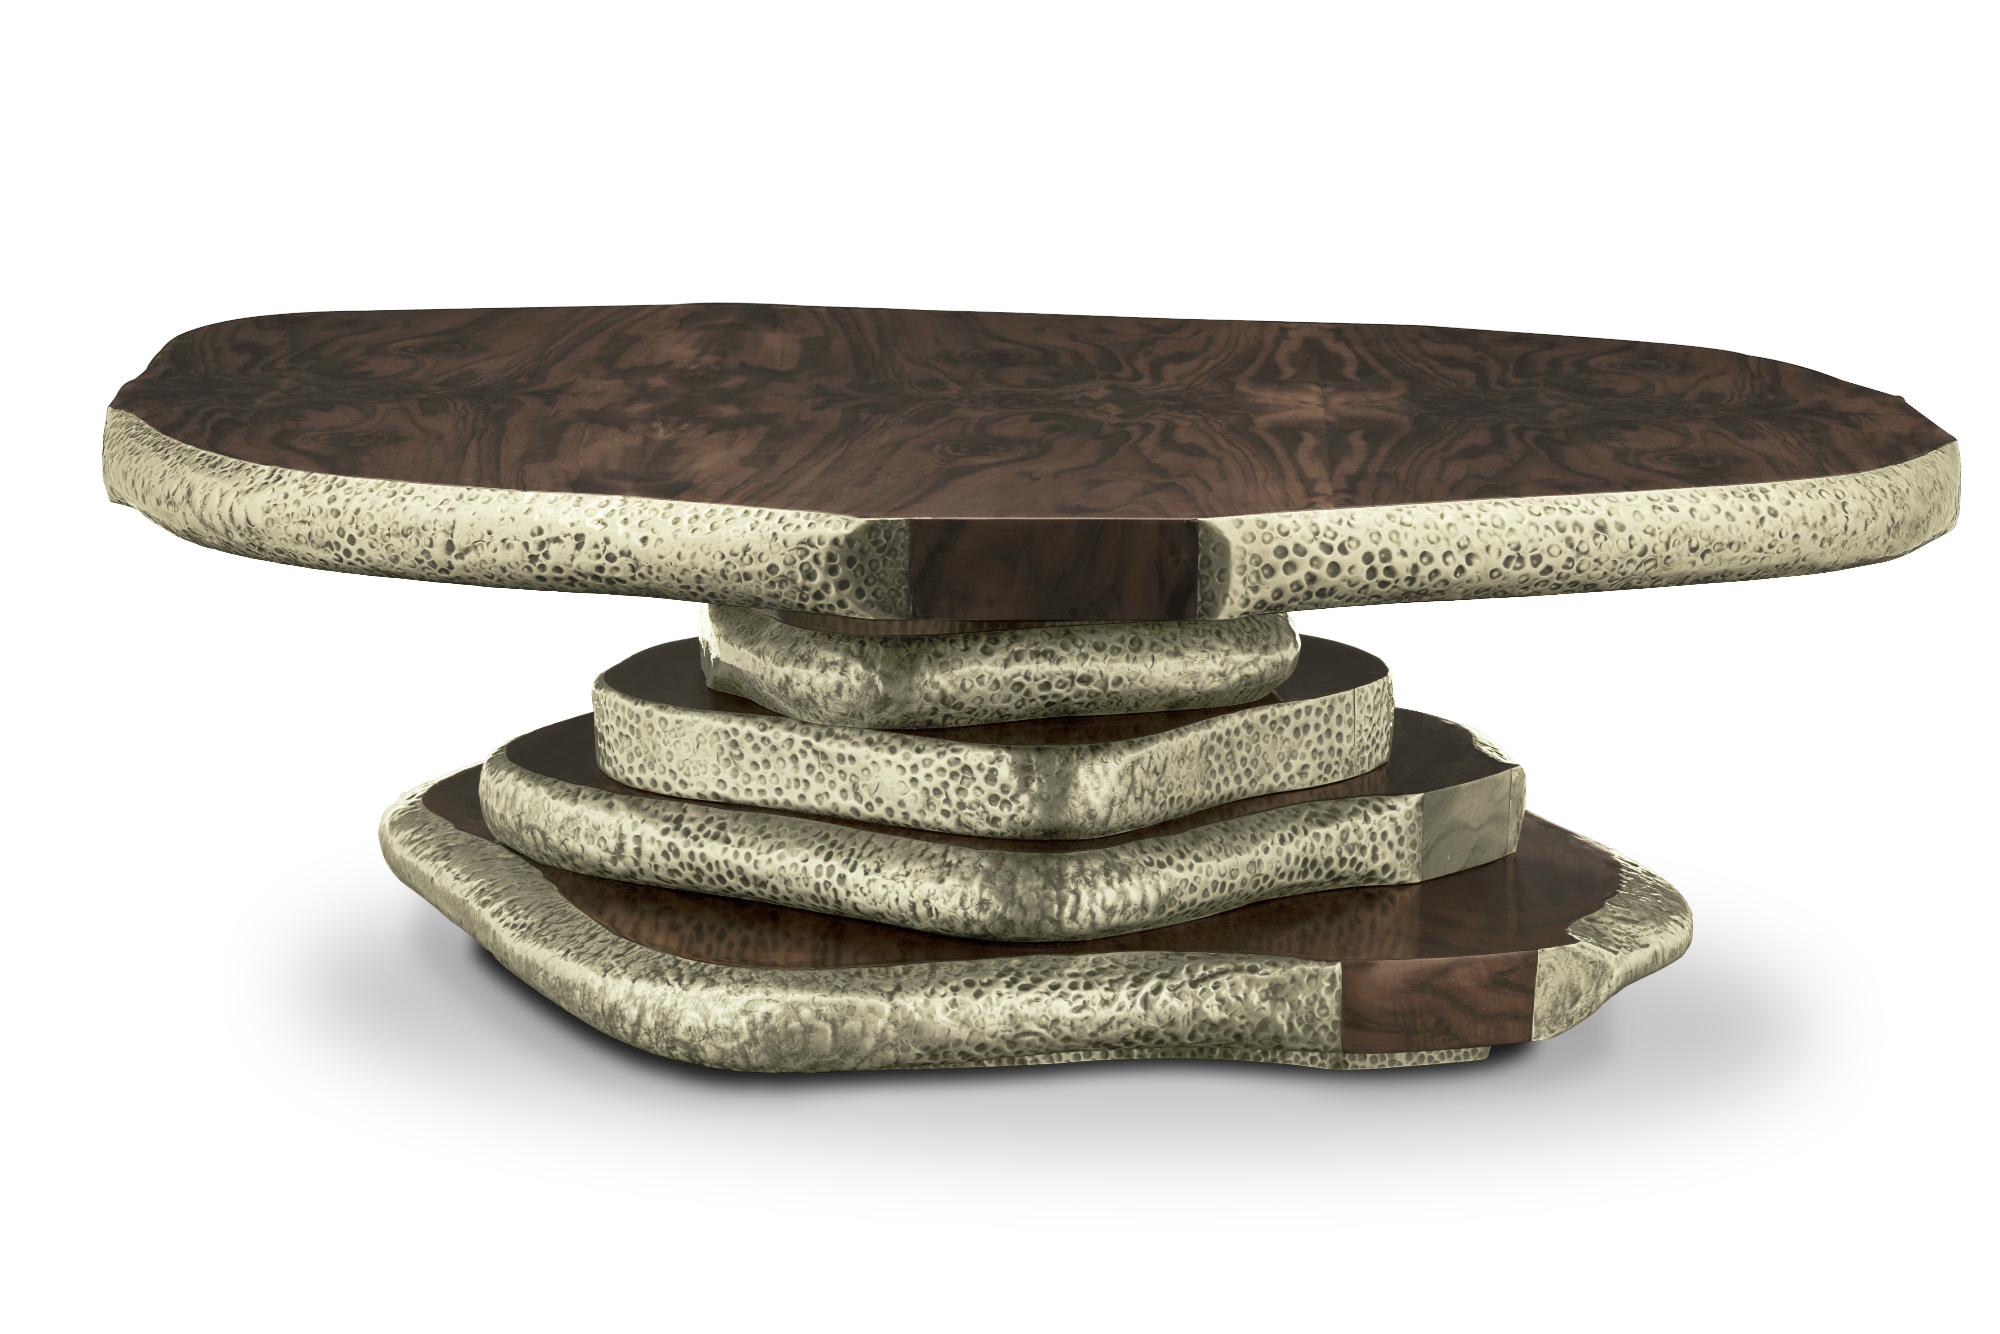 The pyramid of stones on the shore of Lake Baikal, known as Latza, inspired our designers to create LATZA Center Table. 
Walnut root veneer, Hammered aged brass, Palisander veneer, Glossy finish,
